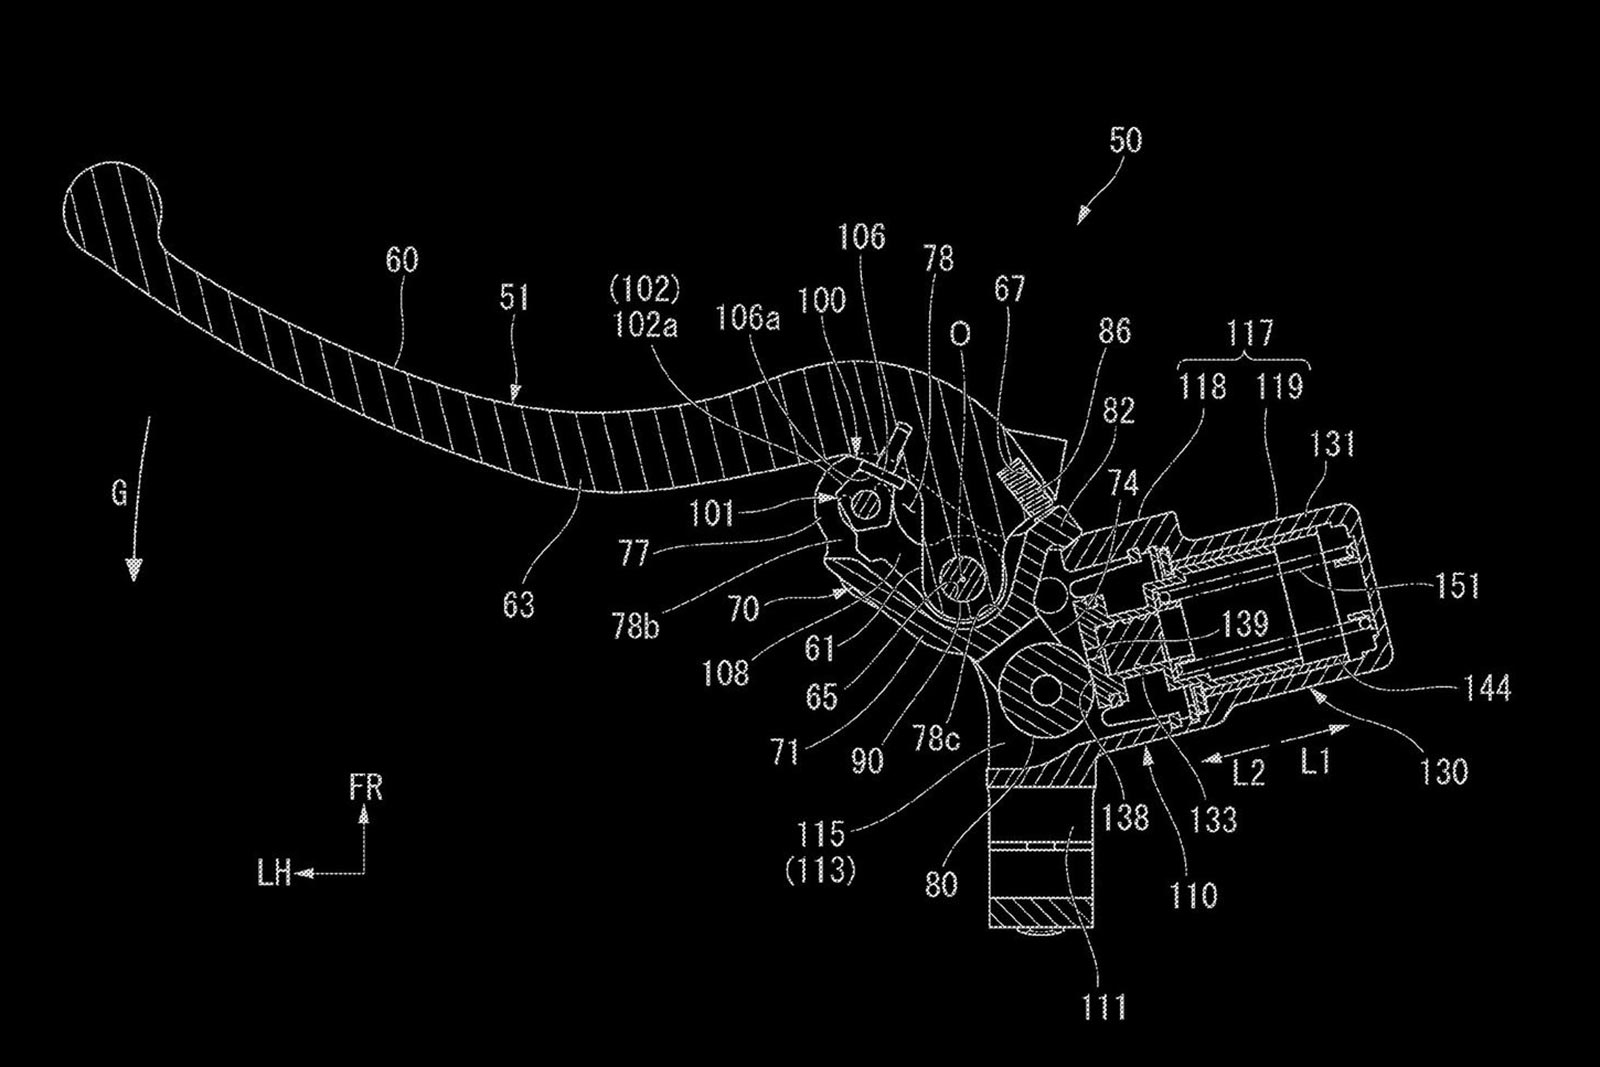 Honda Patents Clutch-by-Wire System for Motorcycles